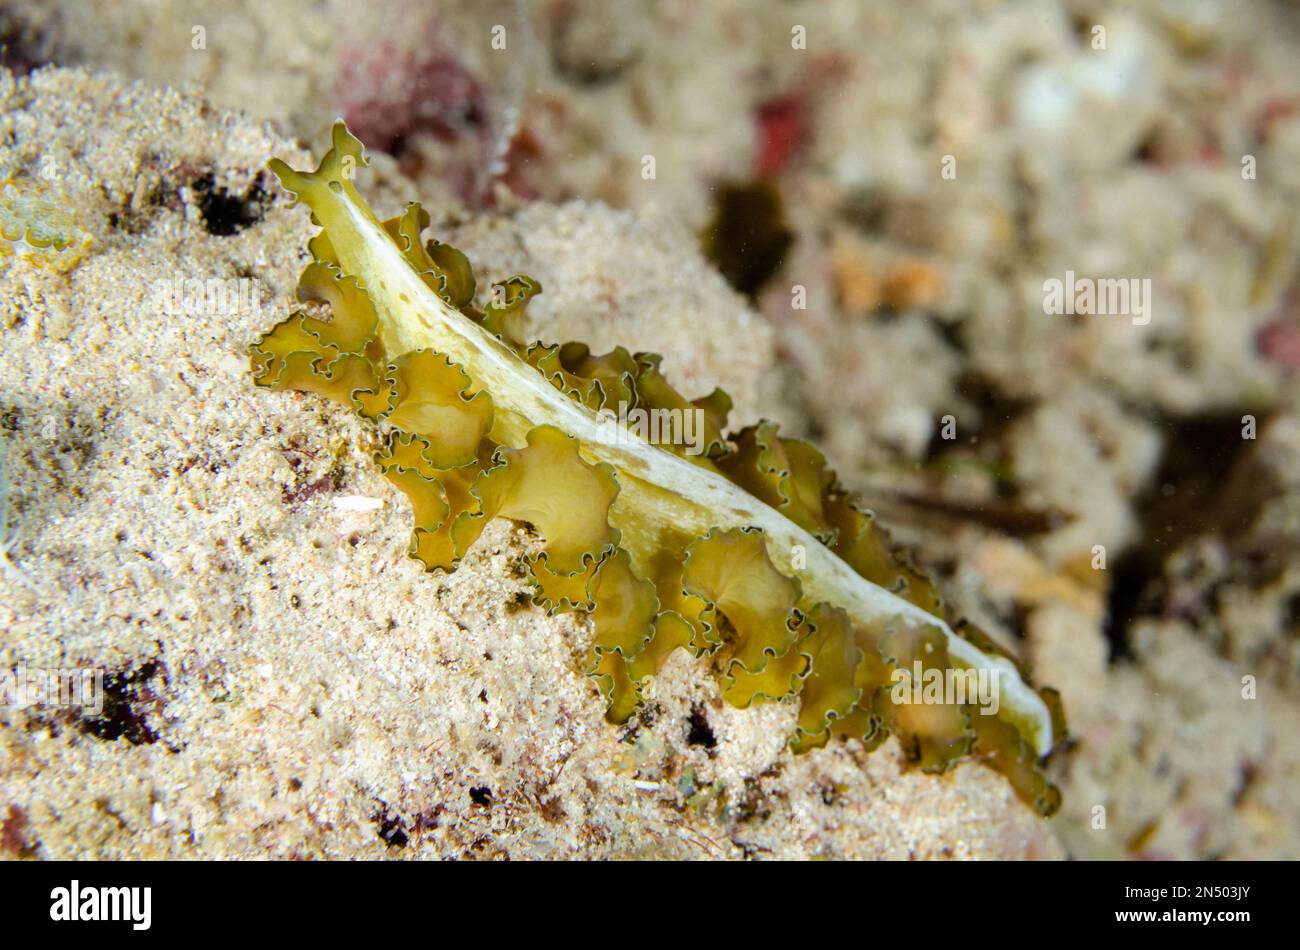 Polyclad Flatworm, Pseudobiceros sp, night dive, Murex House Reef dive site, Bangka Island, north Sulawesi, Indonesia, Pacific Ocean Stock Photo